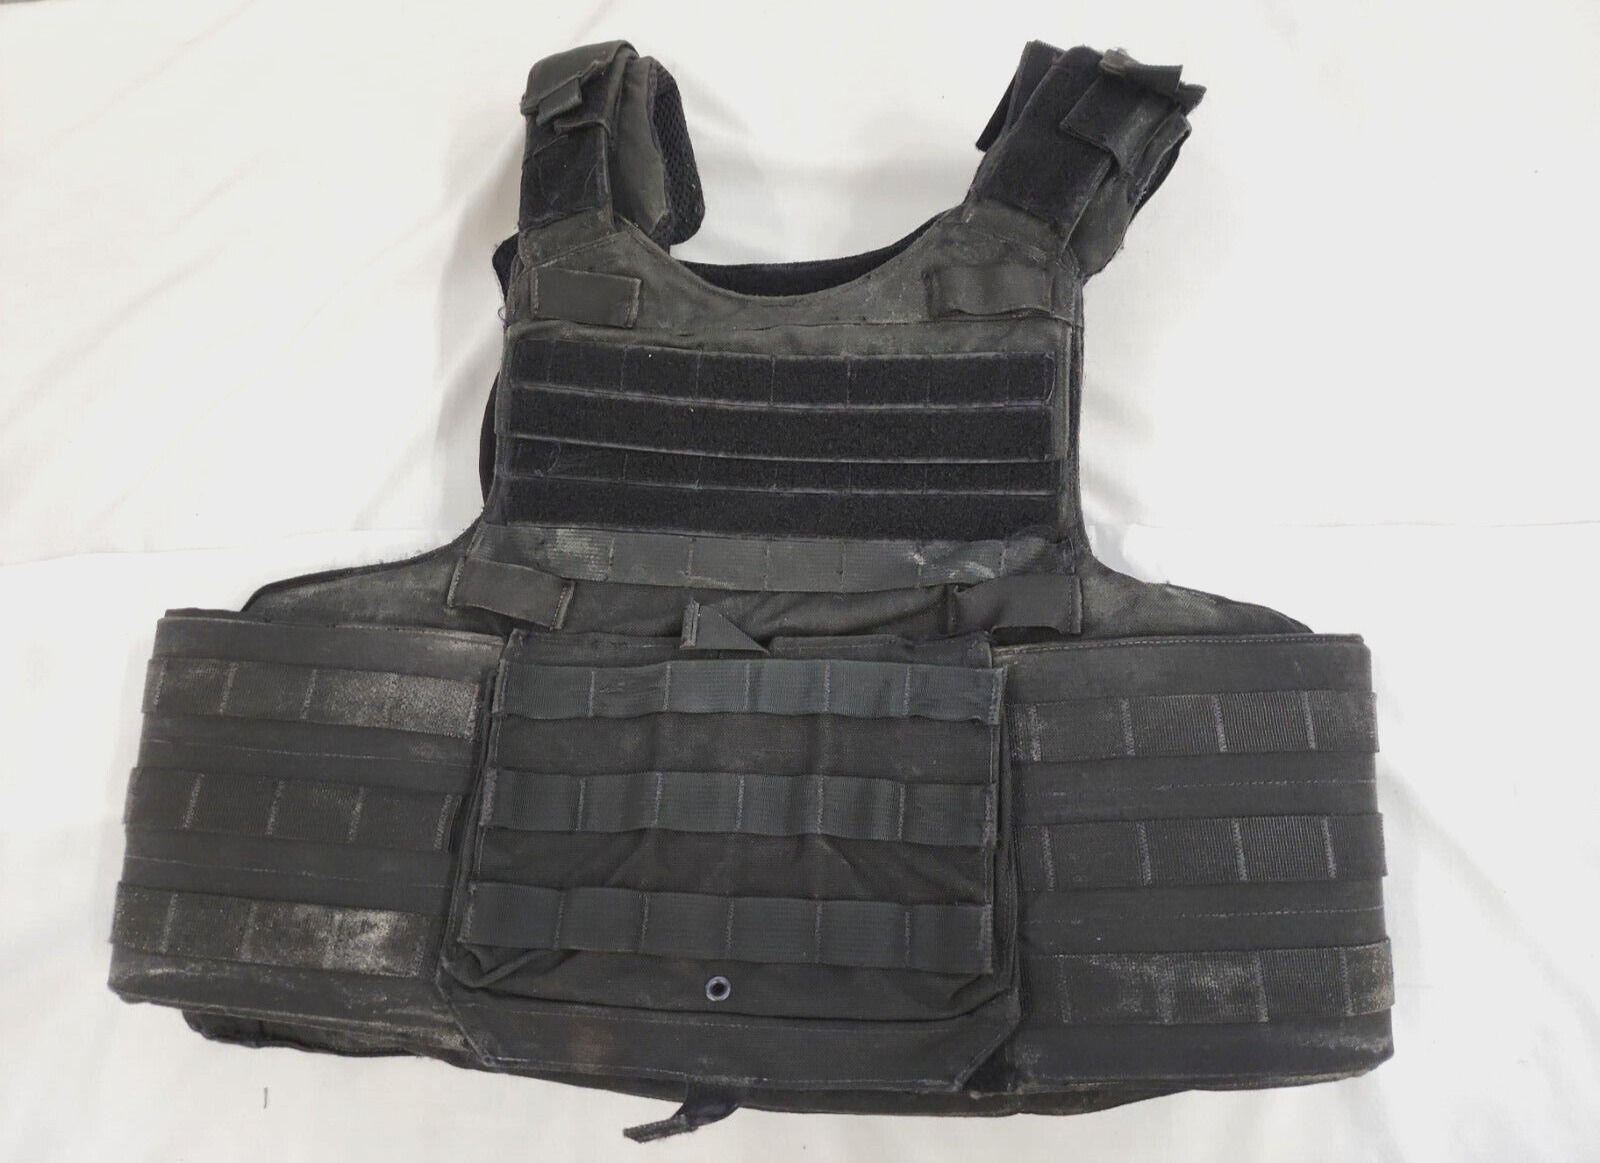 Paraclete FTOC Large Long Armor Carrier w/ 3A Inserts Black Cag Sof Devgru Seal